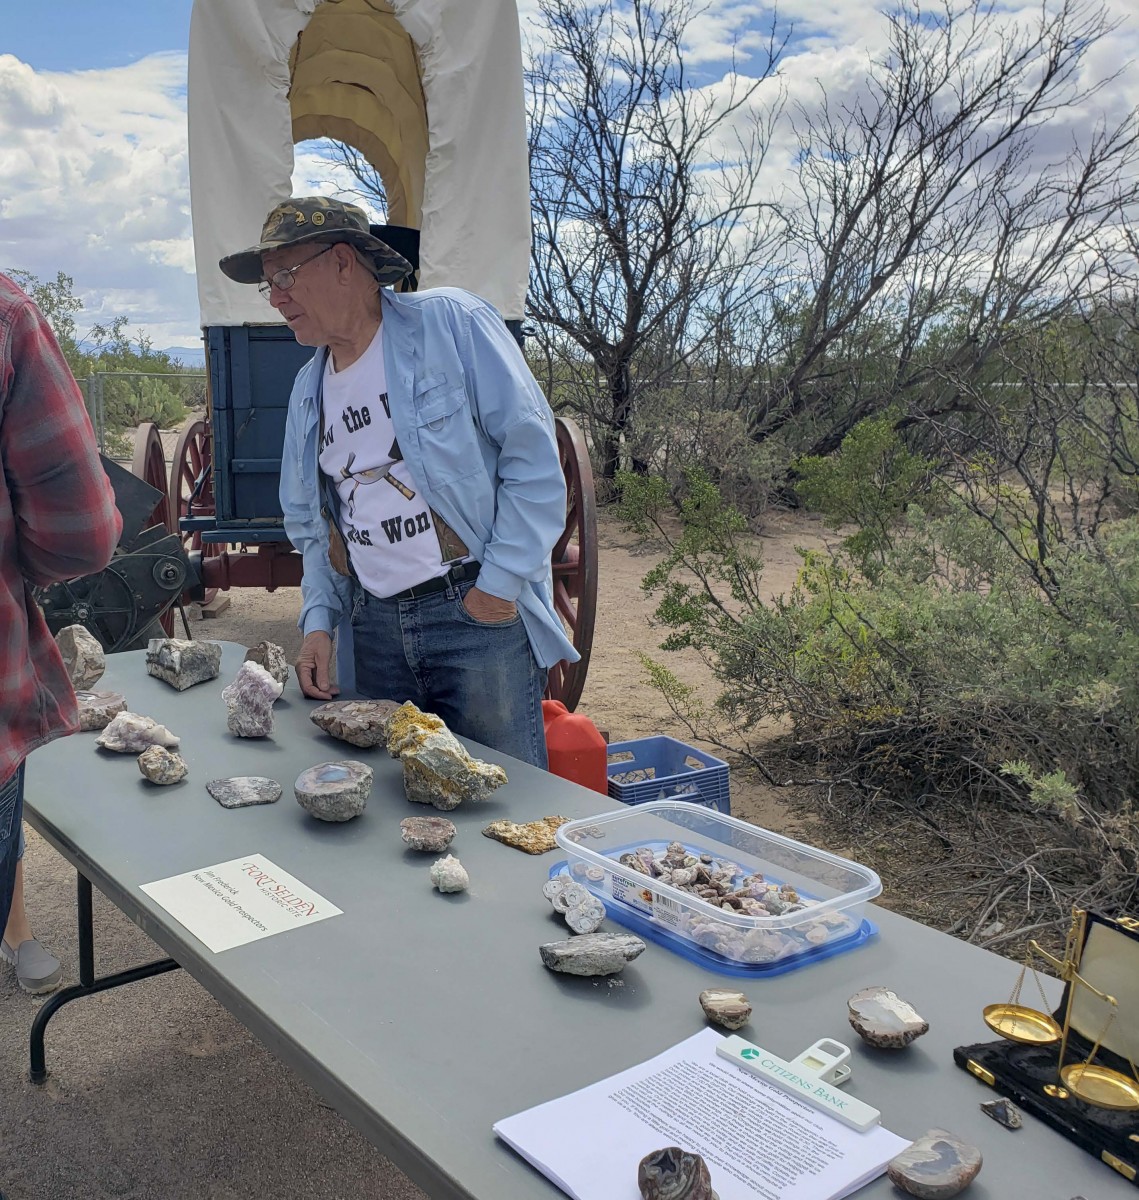 Jim Frederick with the NM Gold Prospectors showcases gems and minerals of southern New Mexico during a special event at Fort Selden.